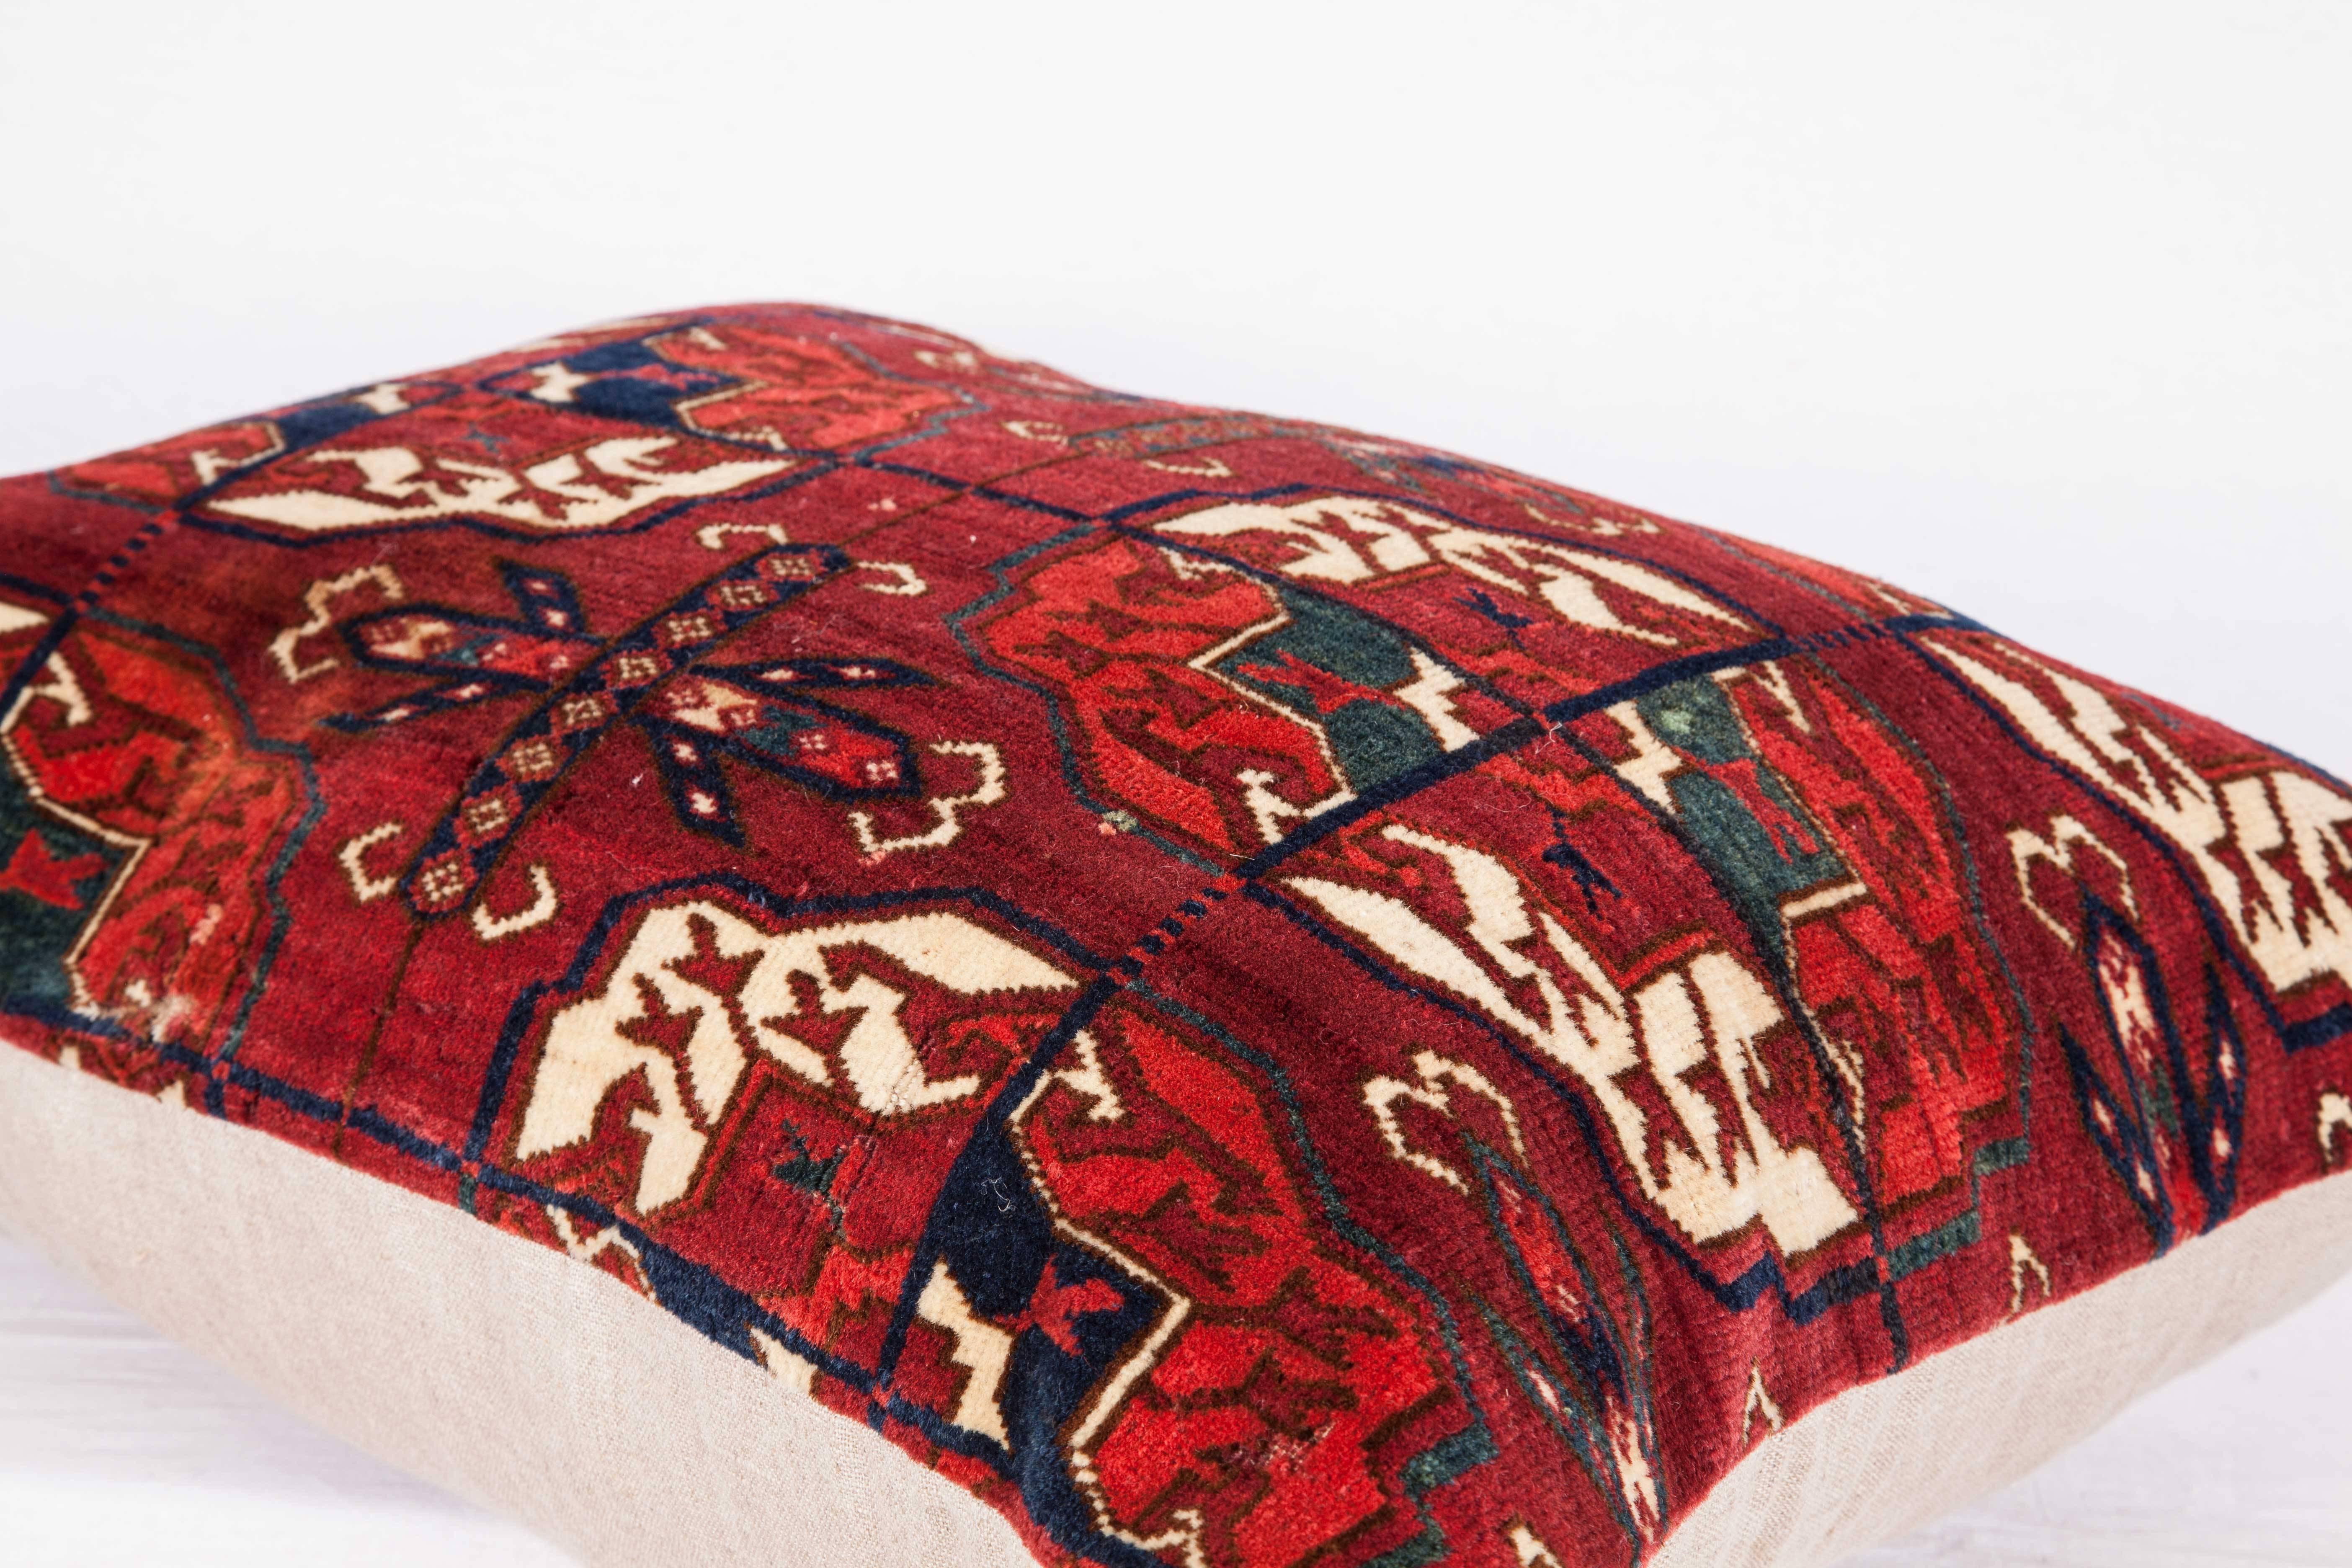 Wool Antique Pillow with Velvet like Texture Made Out of a Turkmen Rug